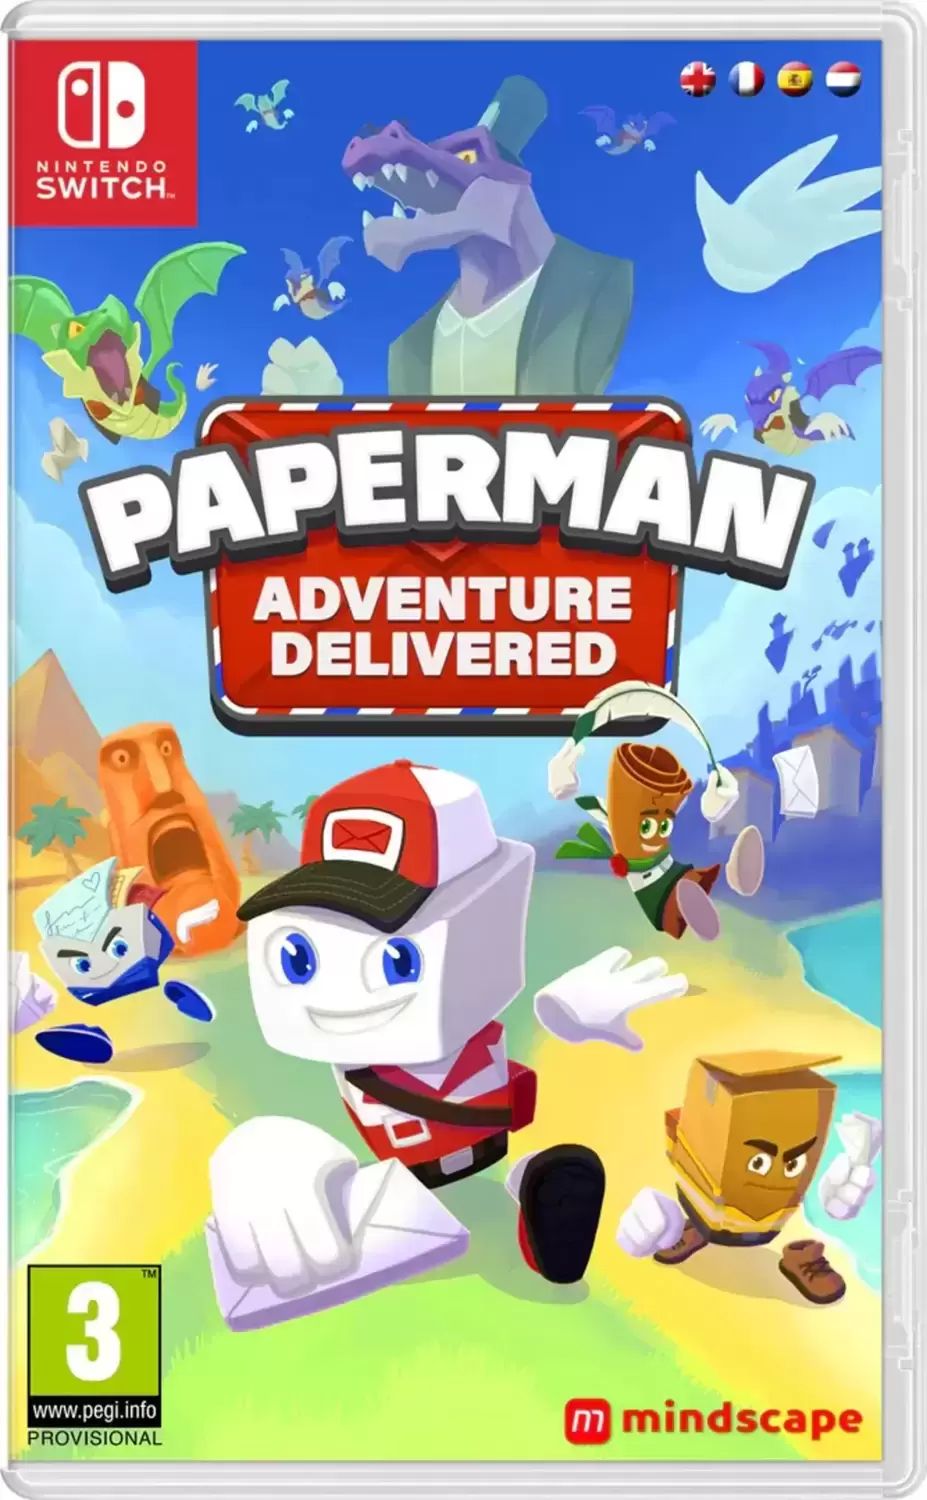 Nintendo Switch Games - Paperman Adventure Delivered